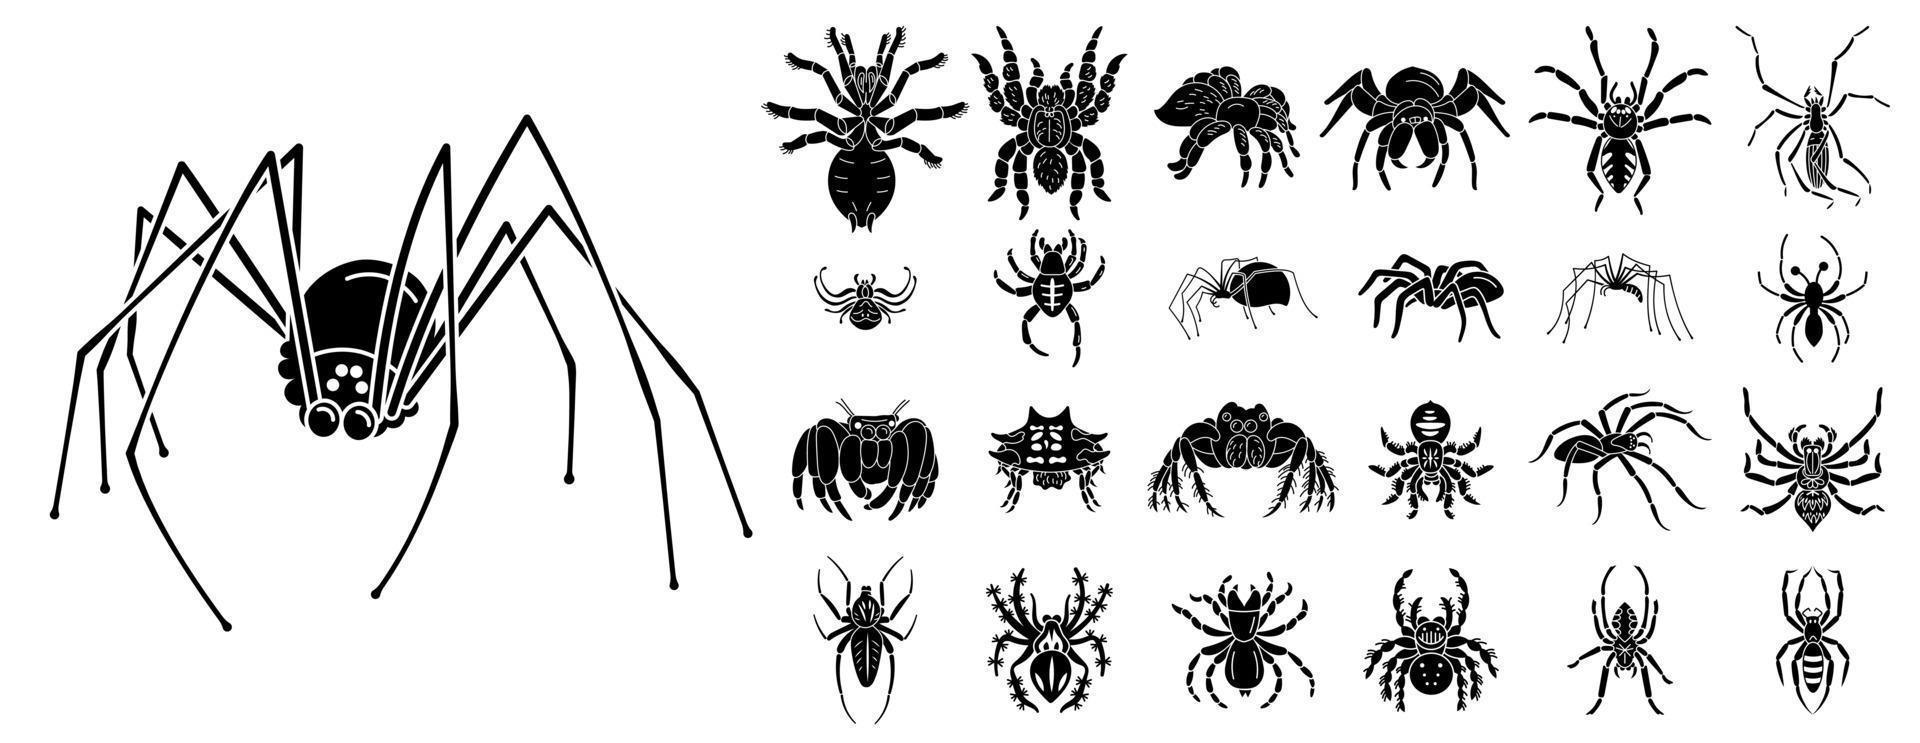 Spider icons set, simple style vector